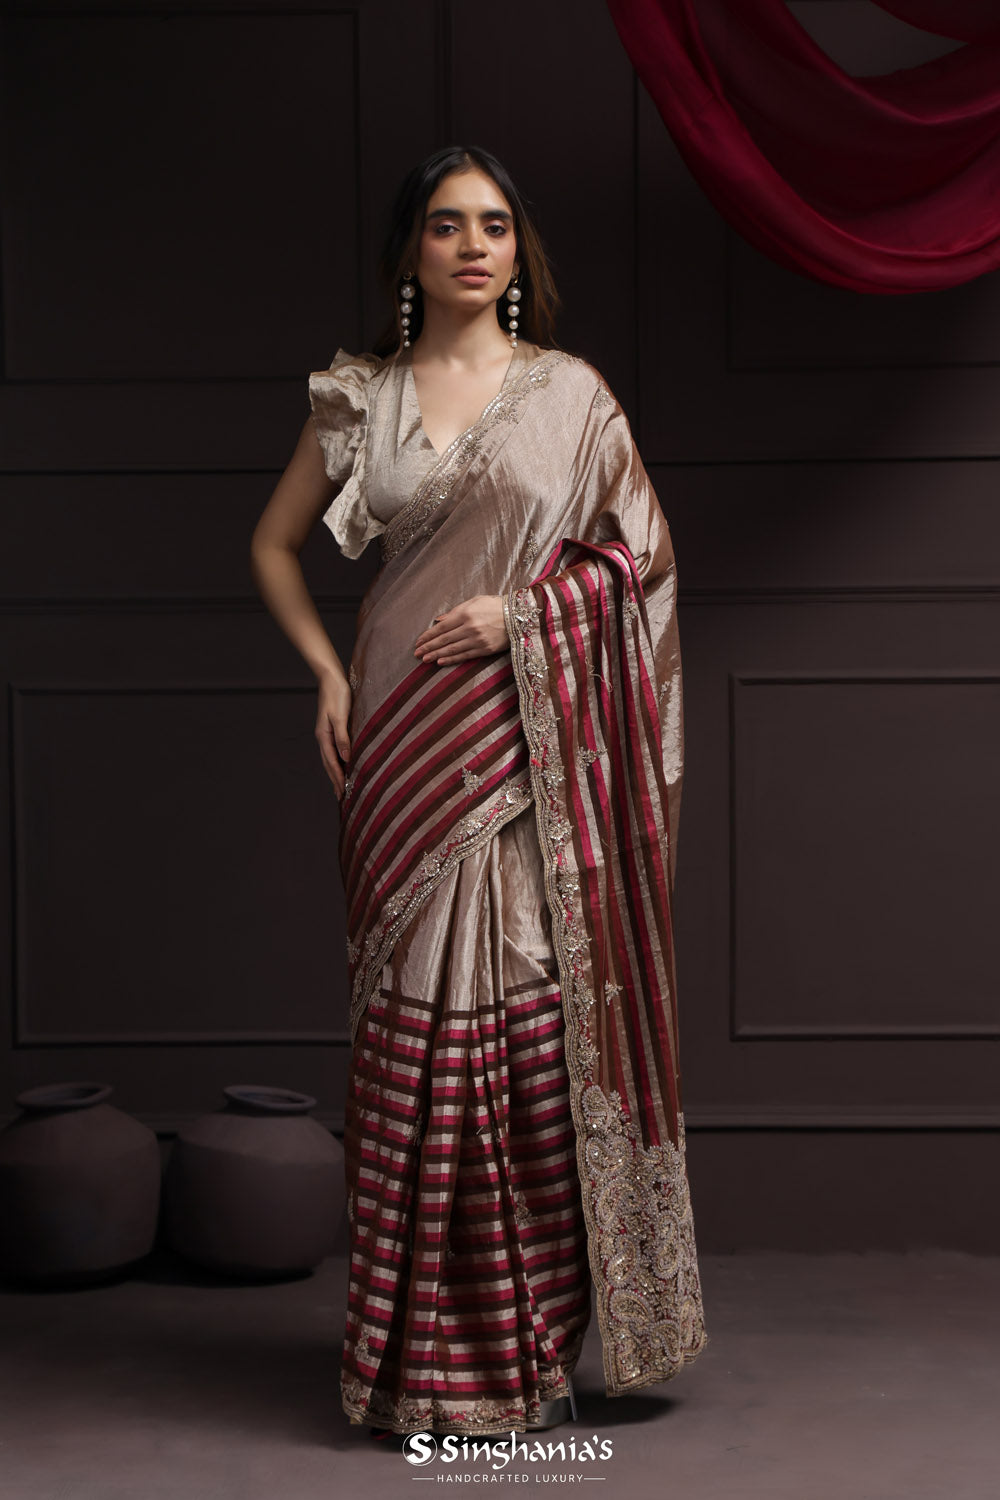 Grey Multi Color Tissue Designer Saree With Floral Embroidery Border